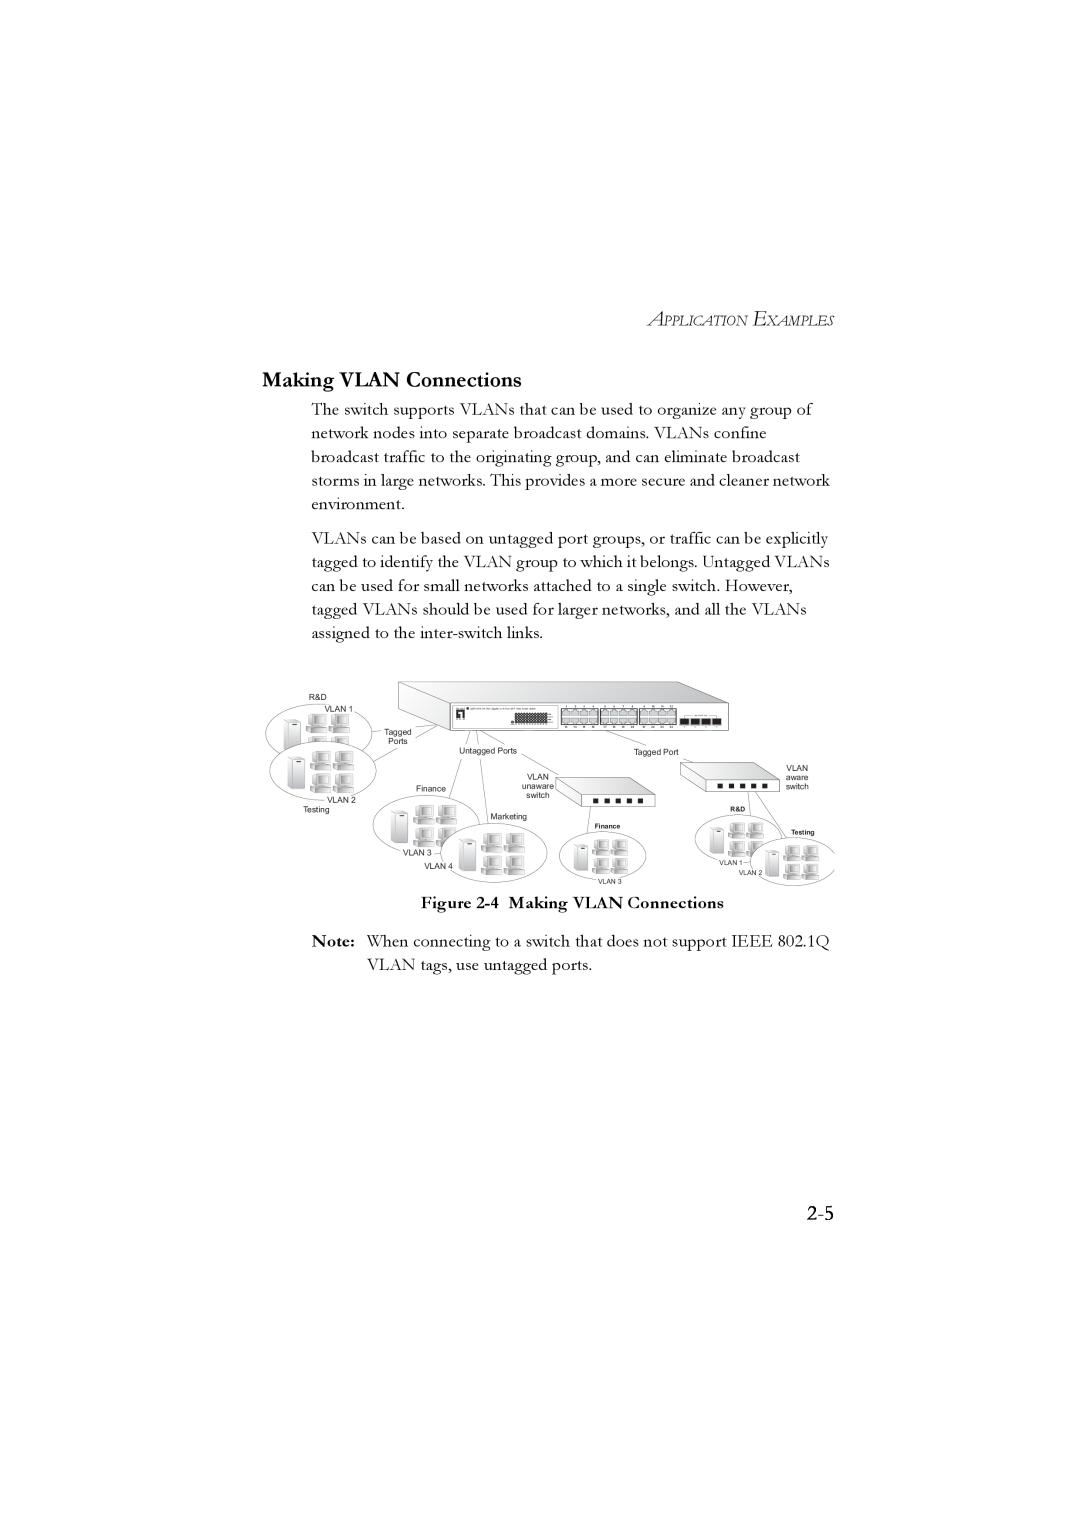 LevelOne GSW-2476 user manual 4 Making VLAN Connections 